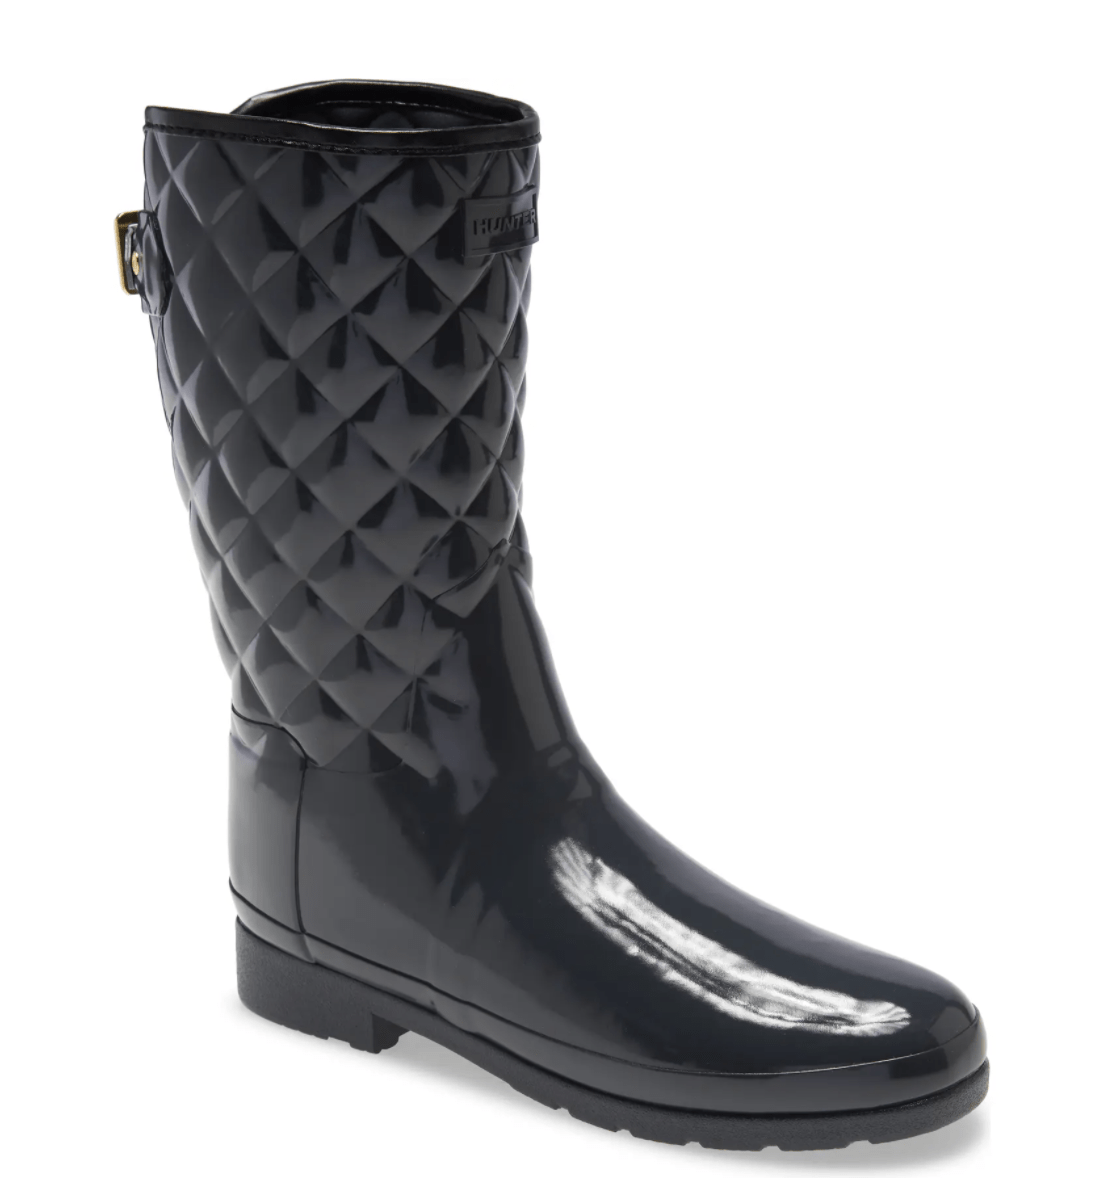 Hunter High Gloss Quilted Waterproof boots